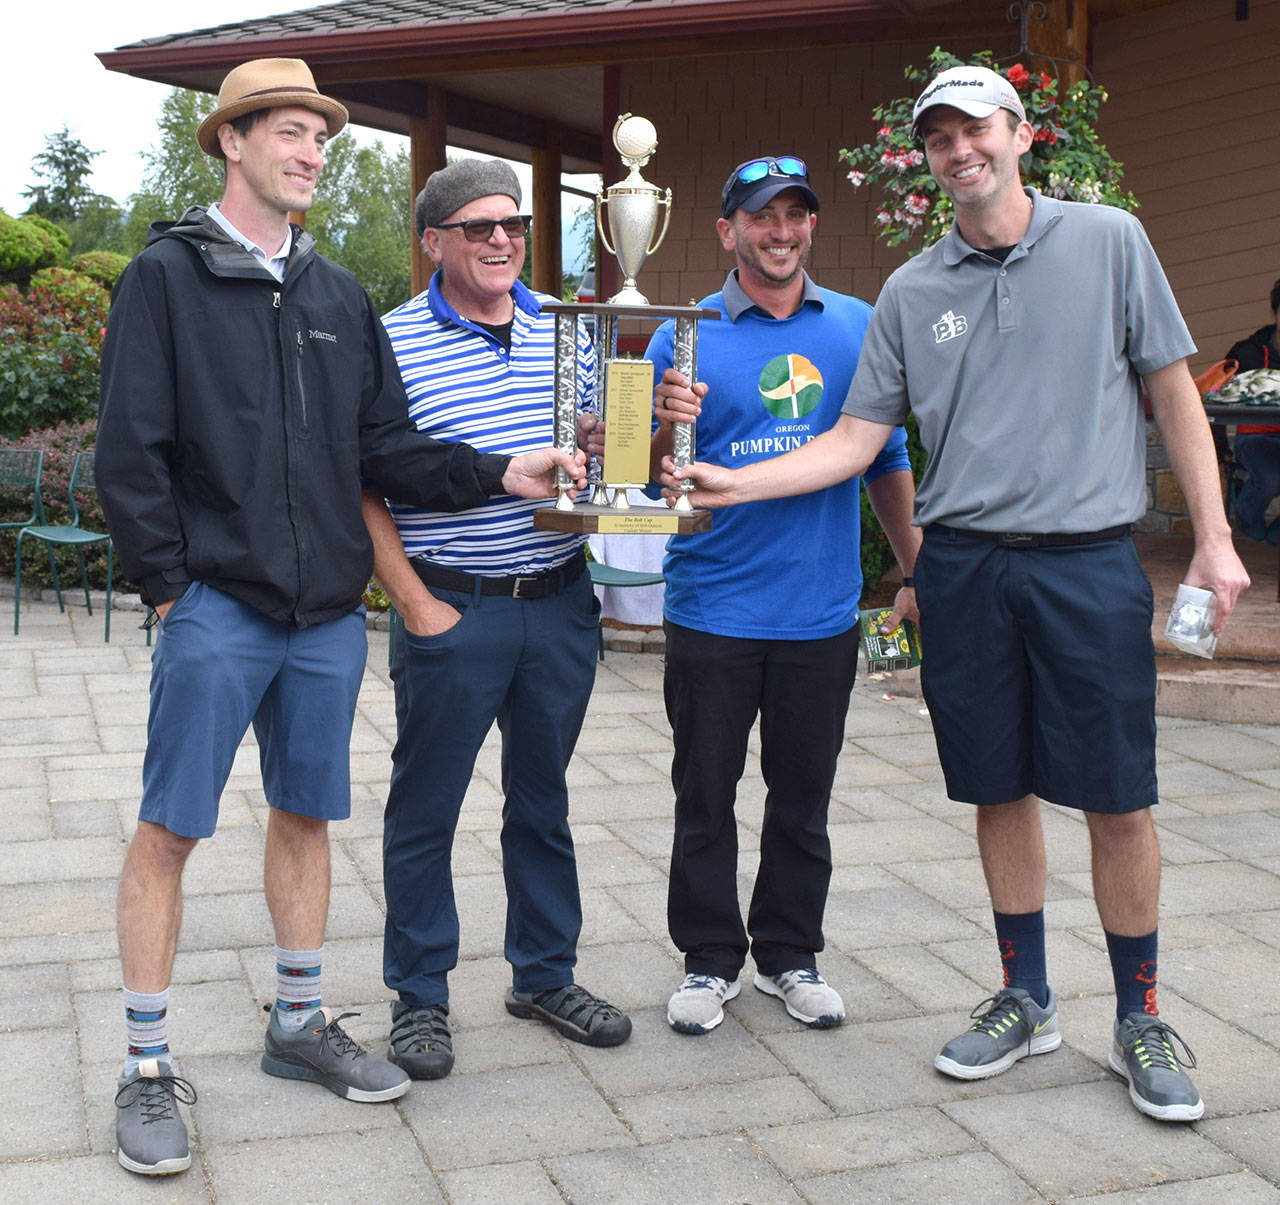 Winners of the 2021 Bob Golf golf tourney include, from left, Adam Shantz, Dean Owen, Derek Moore and Brandon Lancelle. Submitted photo